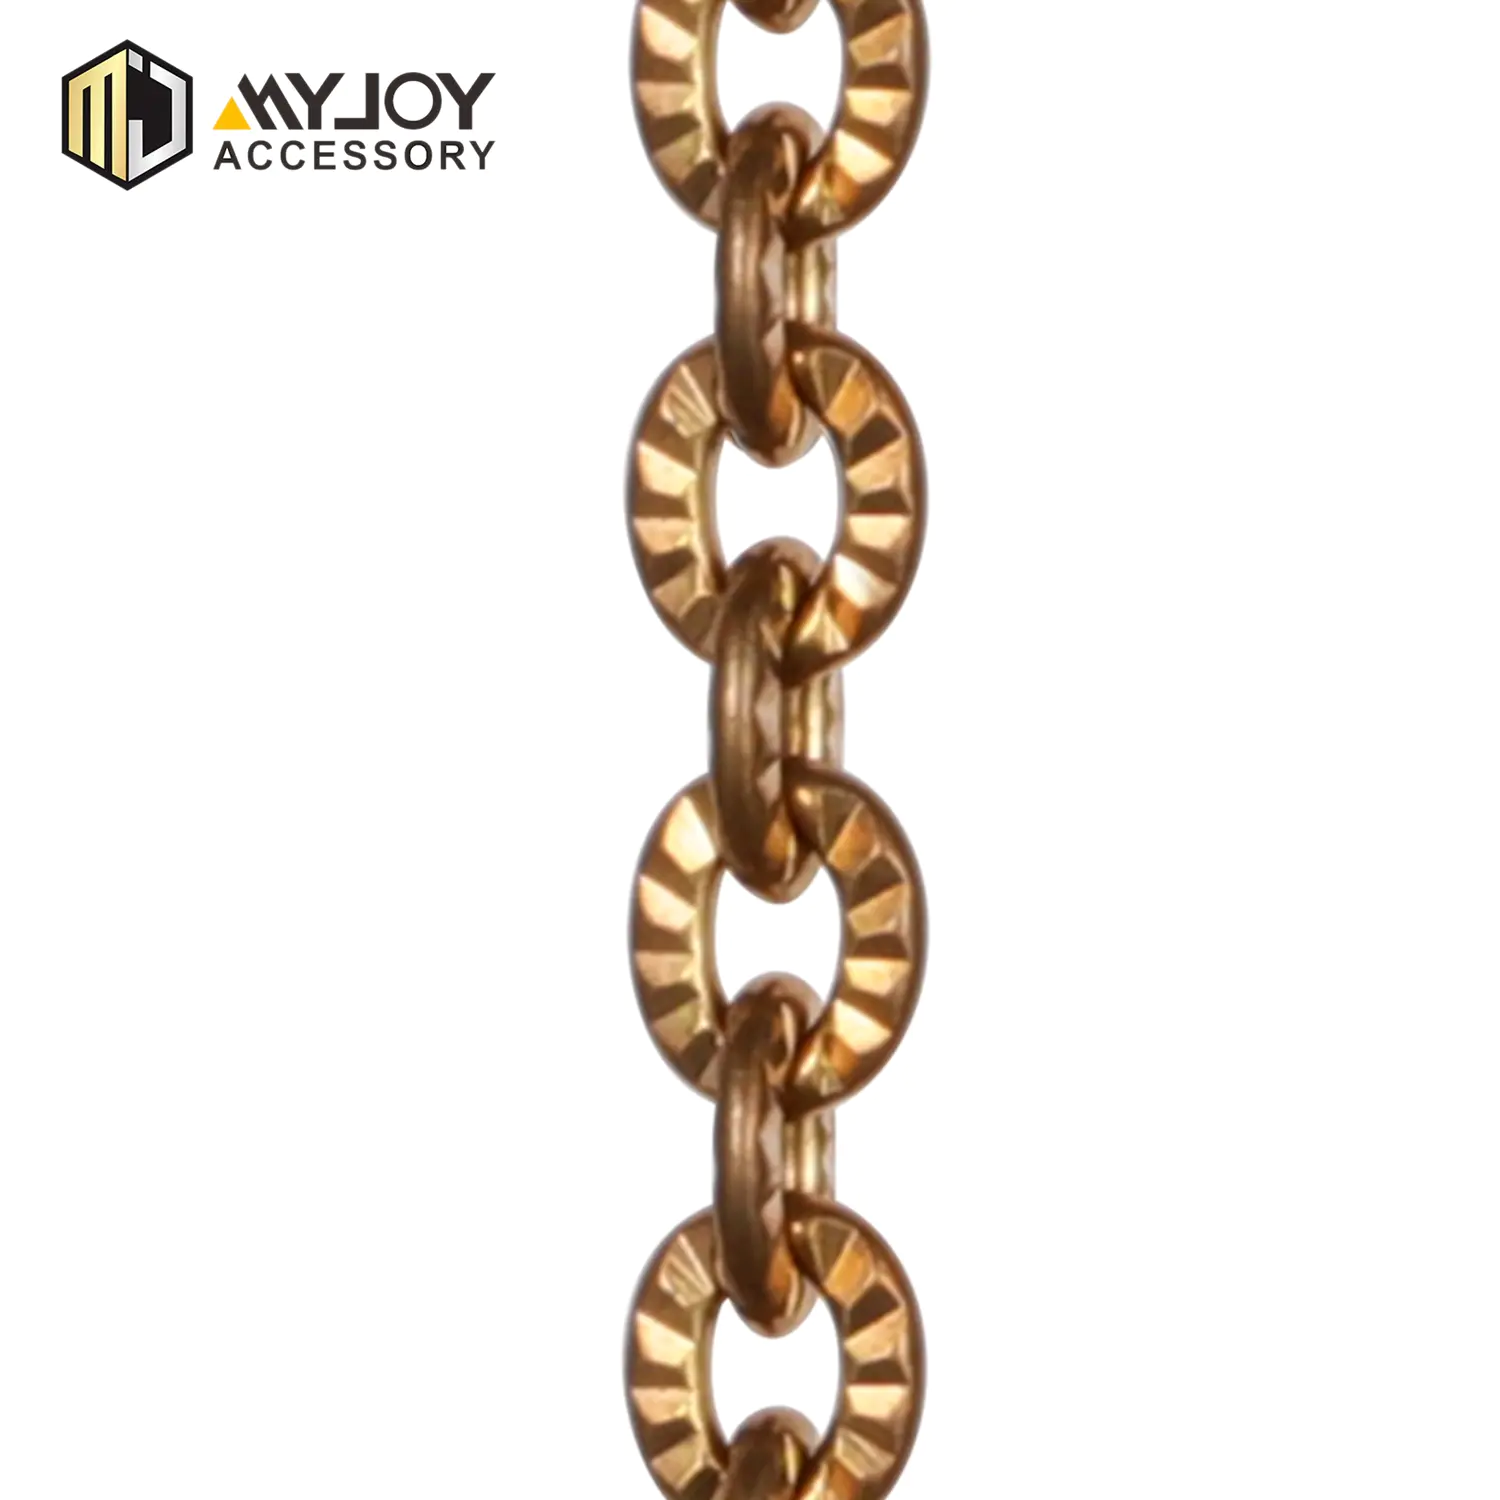 MYJOY Wholesale strap chain factory for bags